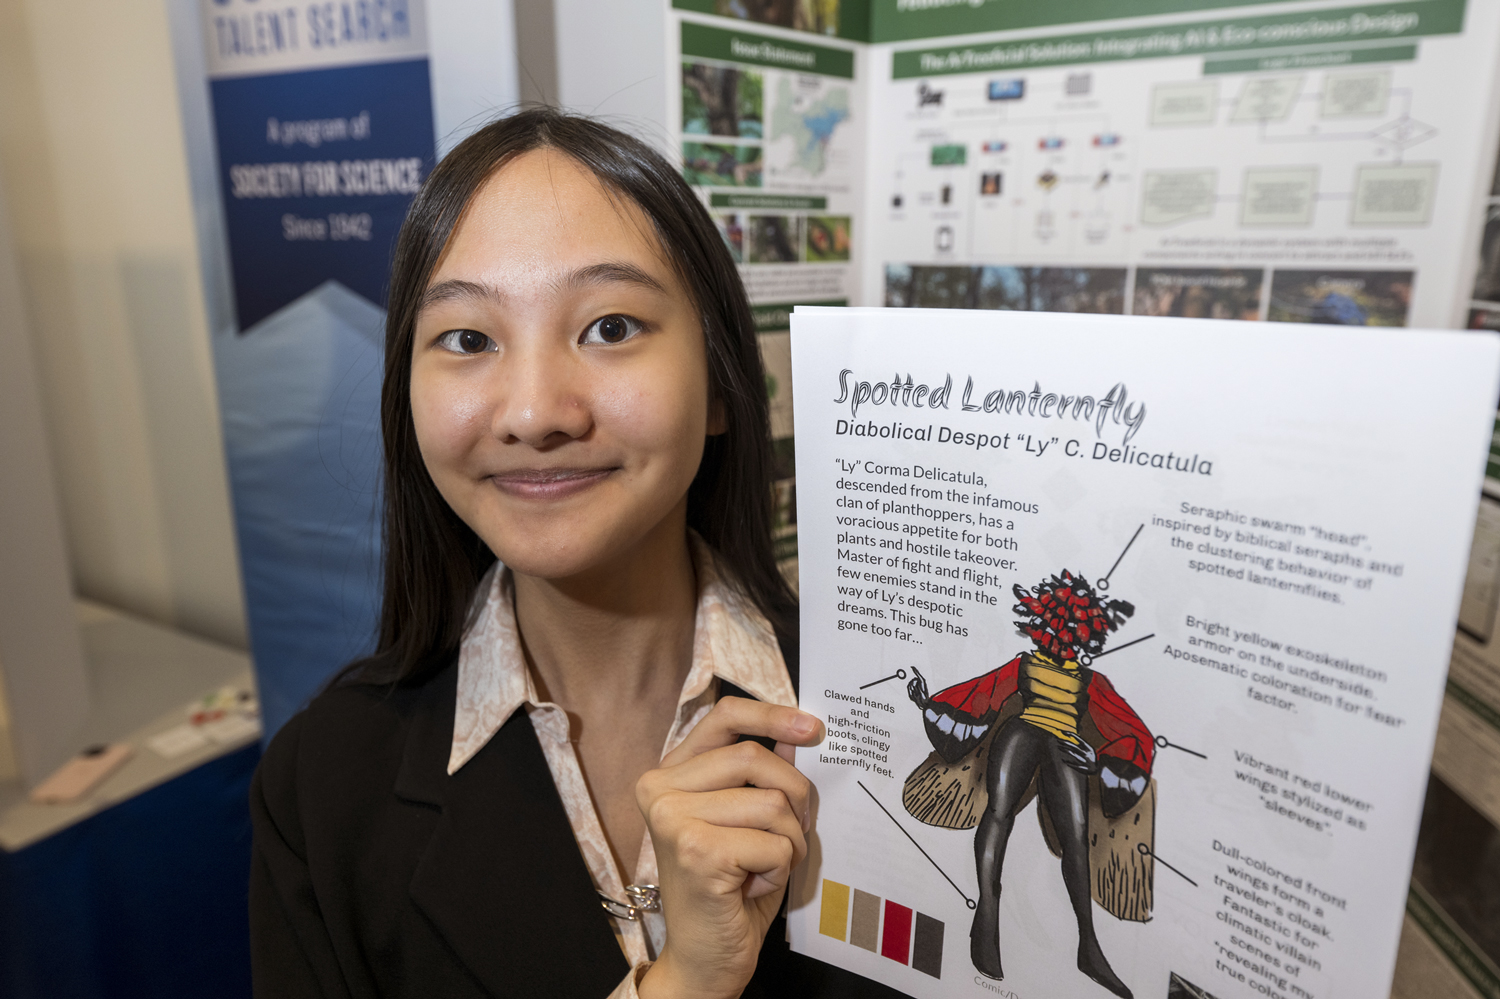 A teen stands in front of an invention presentation while holding up a poster with information about lanternflies.